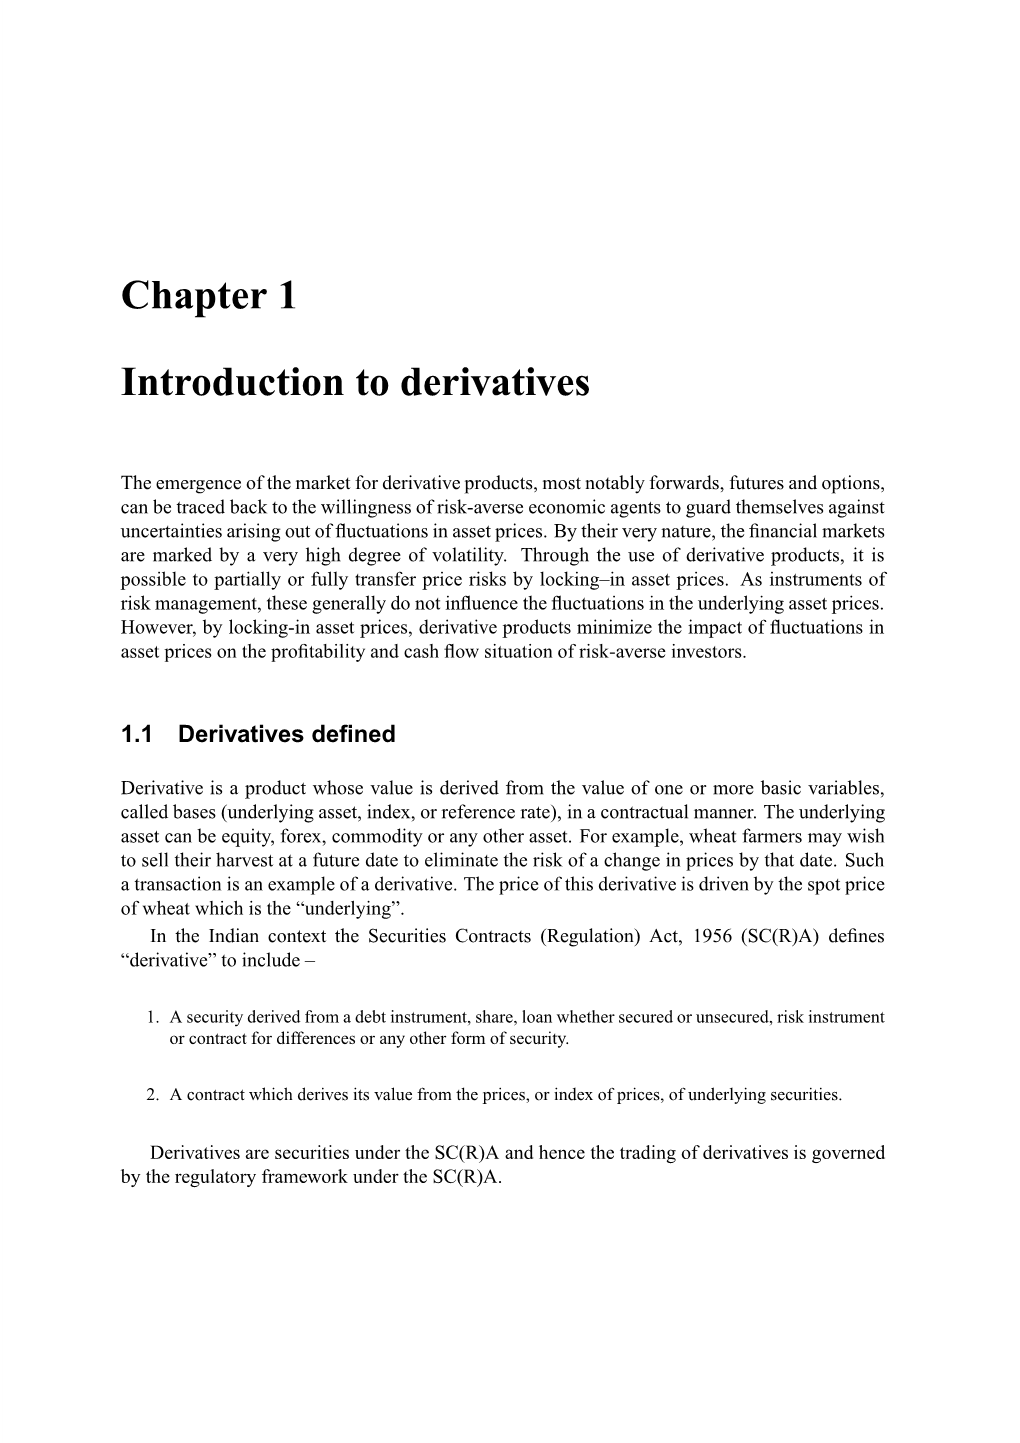 Chapter 1 Introduction to Derivatives